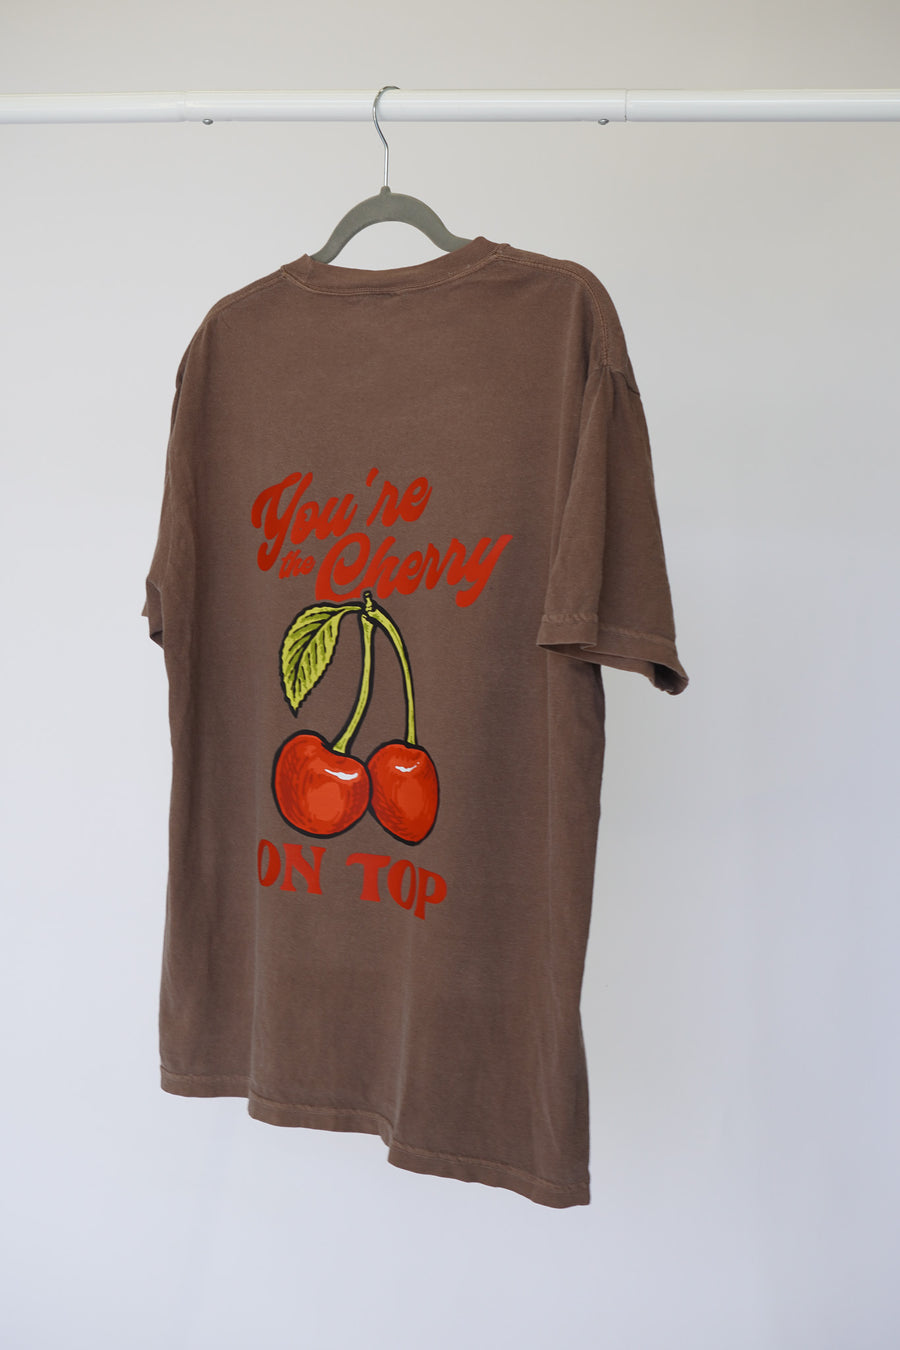 You're the Cherry on Top Tee